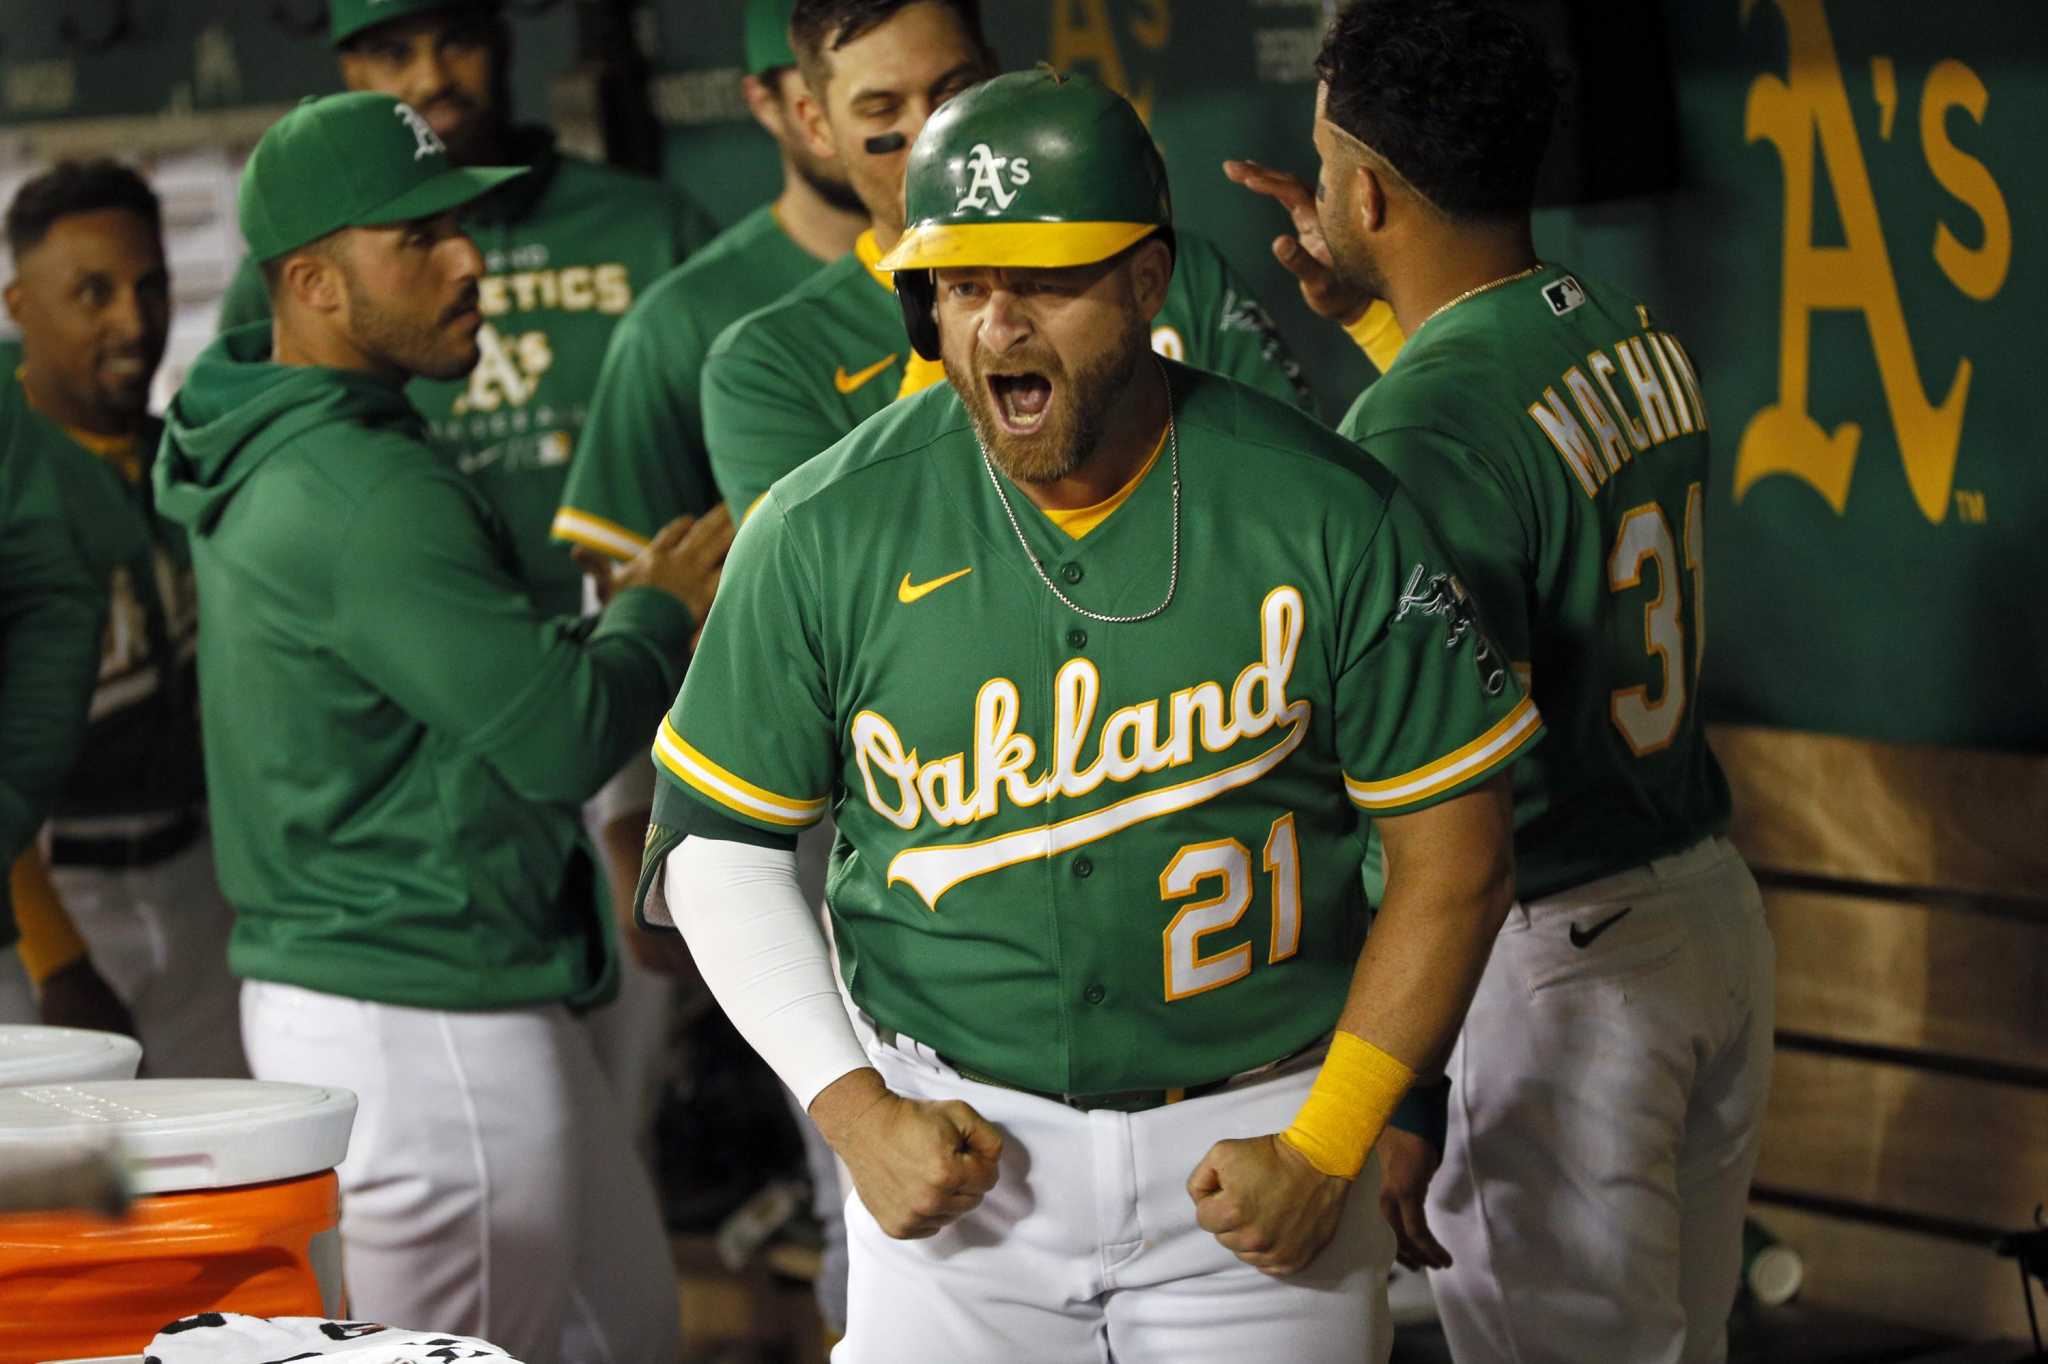 A's Stephen Vogt Hits Homer in Final Game Before Retirement